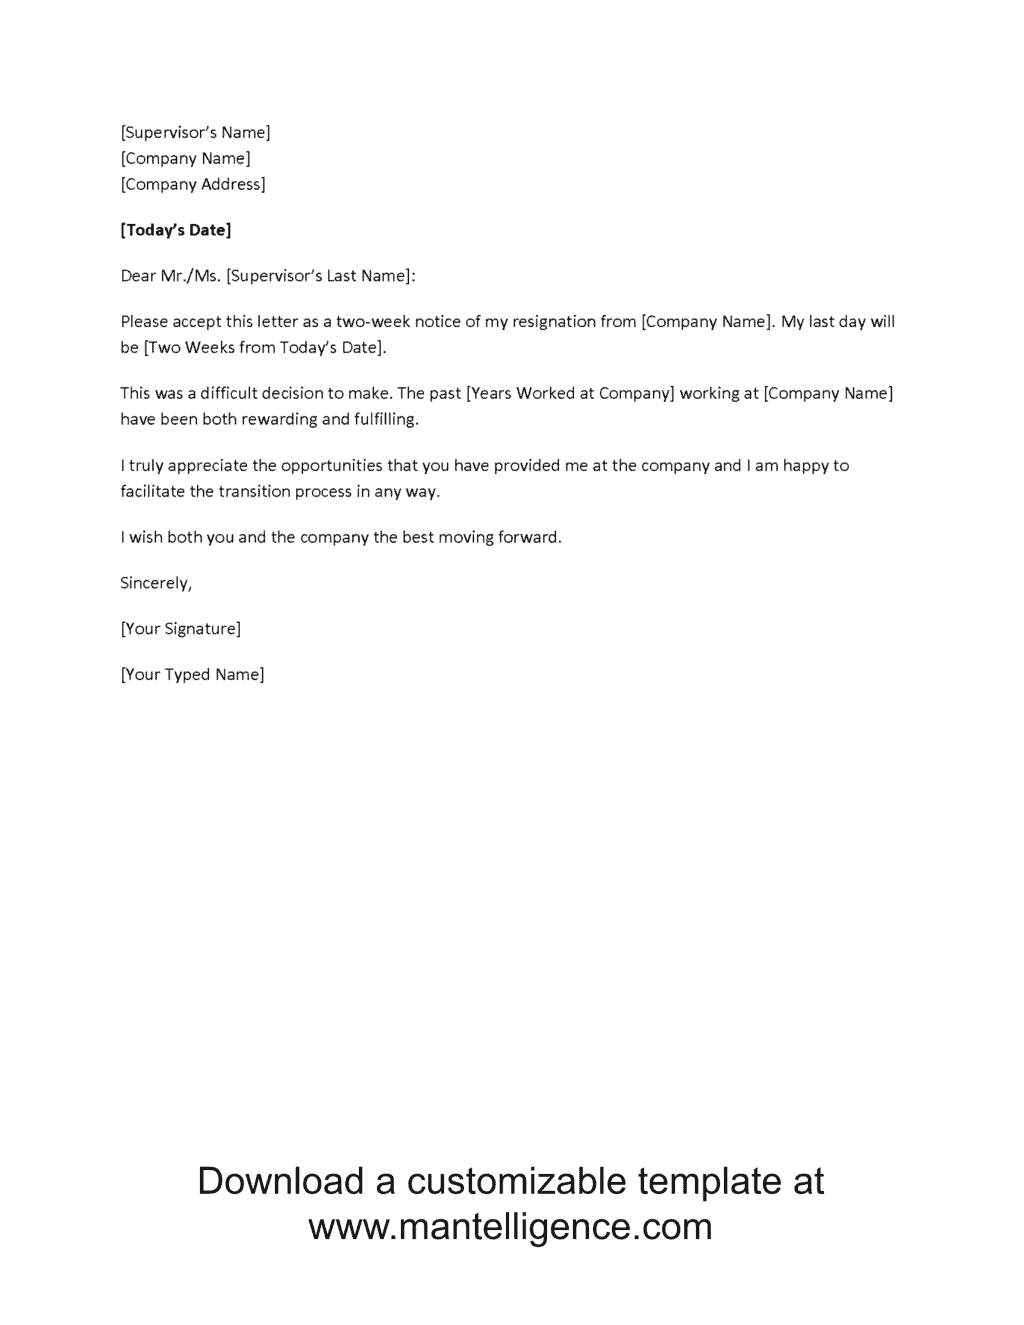 3 Highly Professional Two Weeks Notice Letter Templates